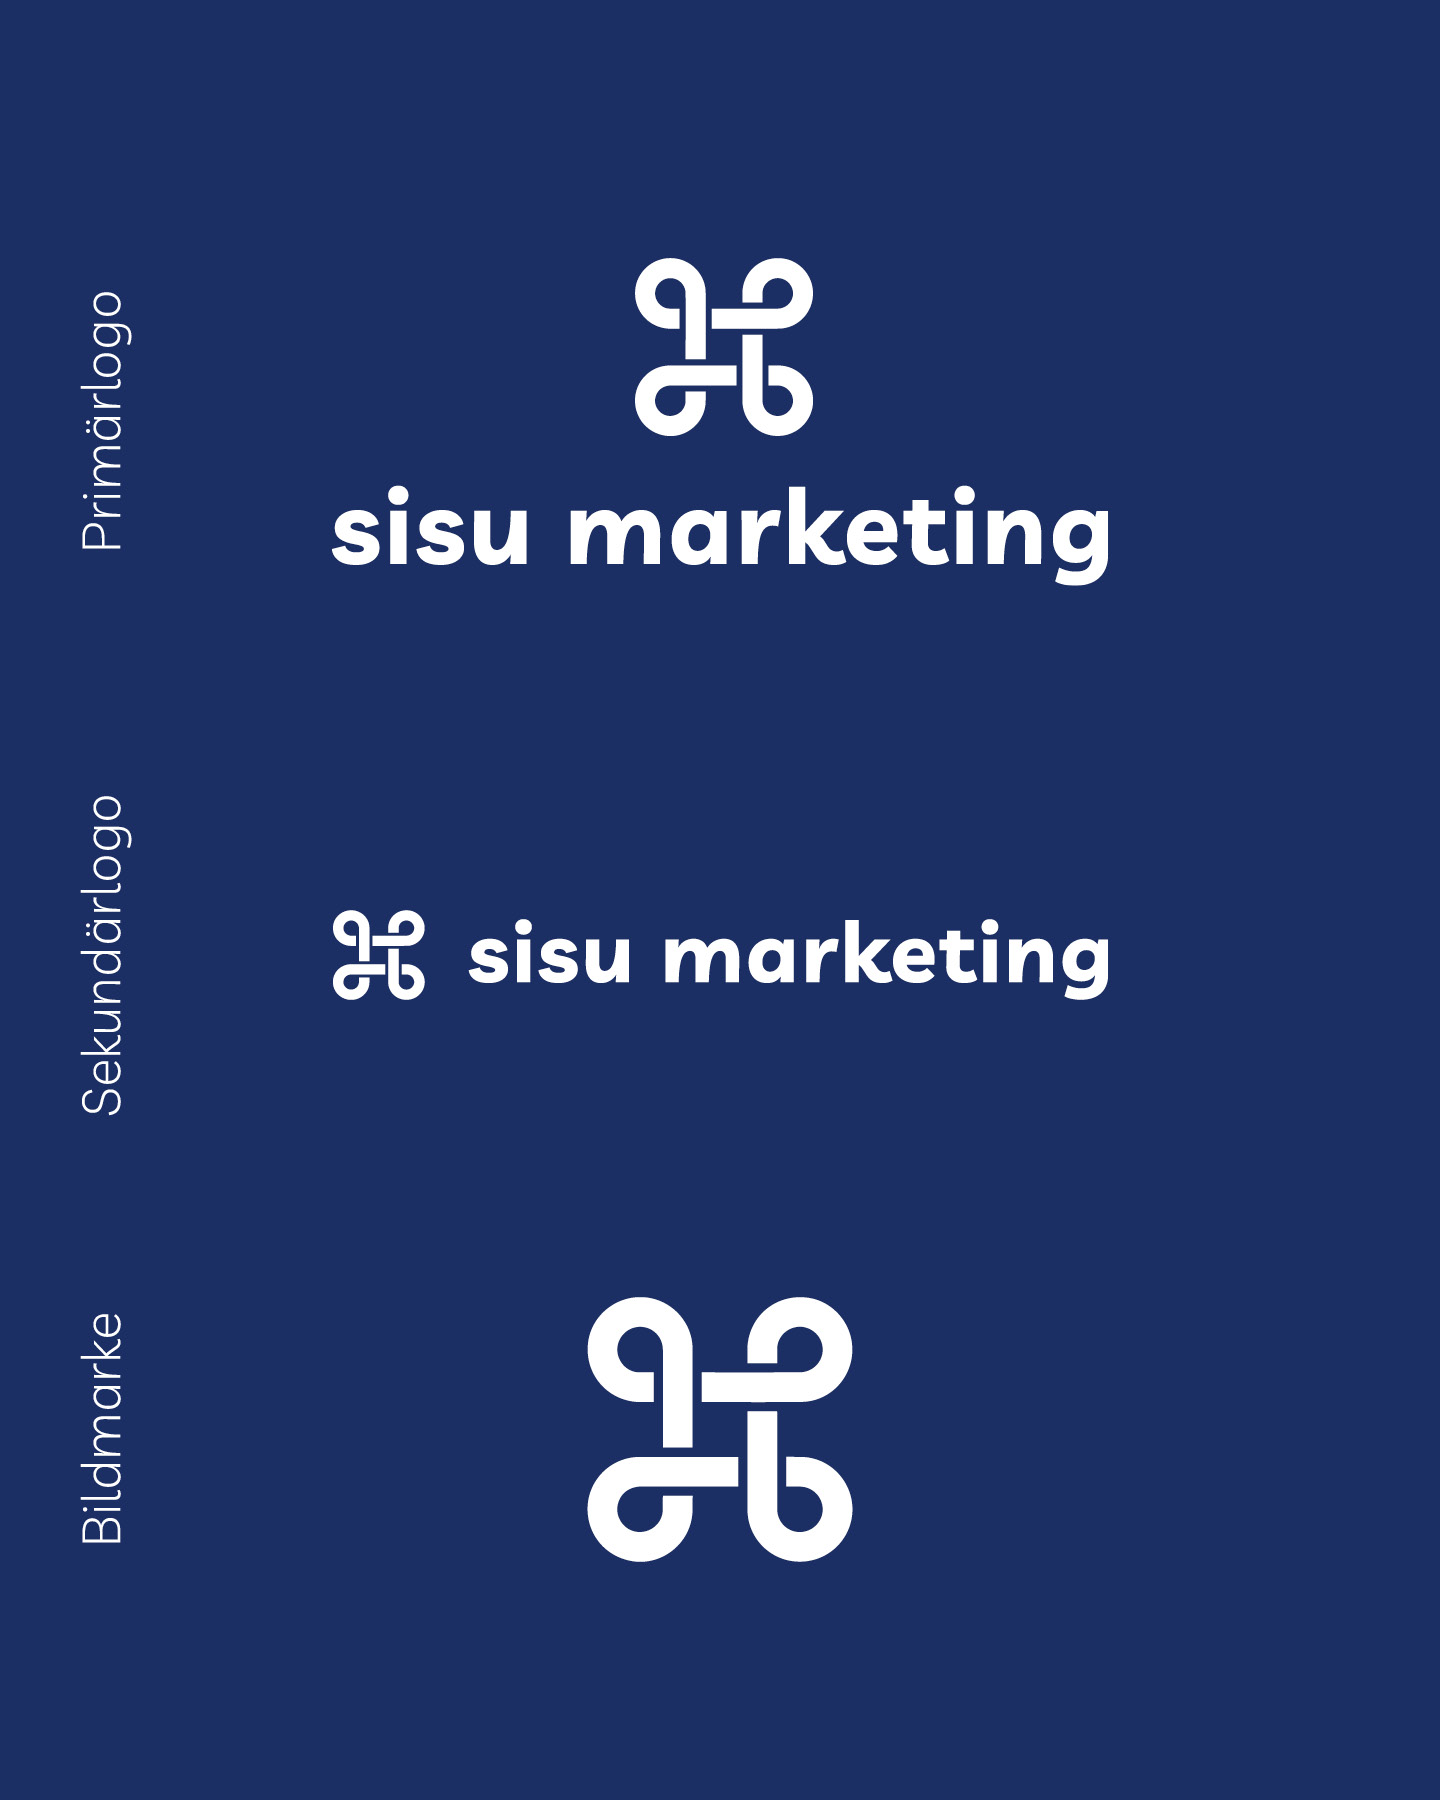 logos overview of sisu marketing - by corliss design